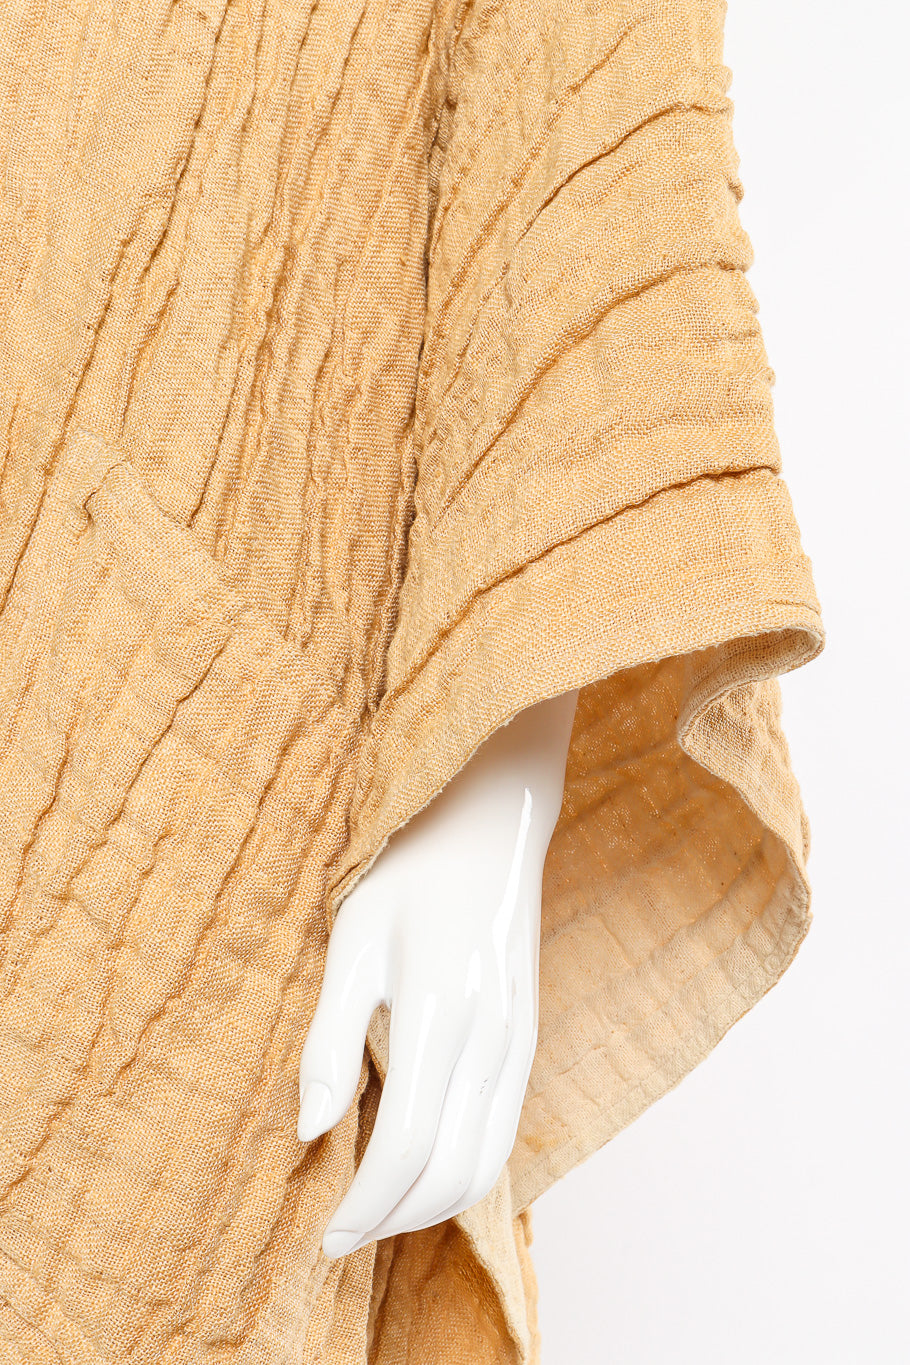 Issey Miyake Flax Linen Pleated Kimono view of sleeve opening on mannequin closeup  @Recessla